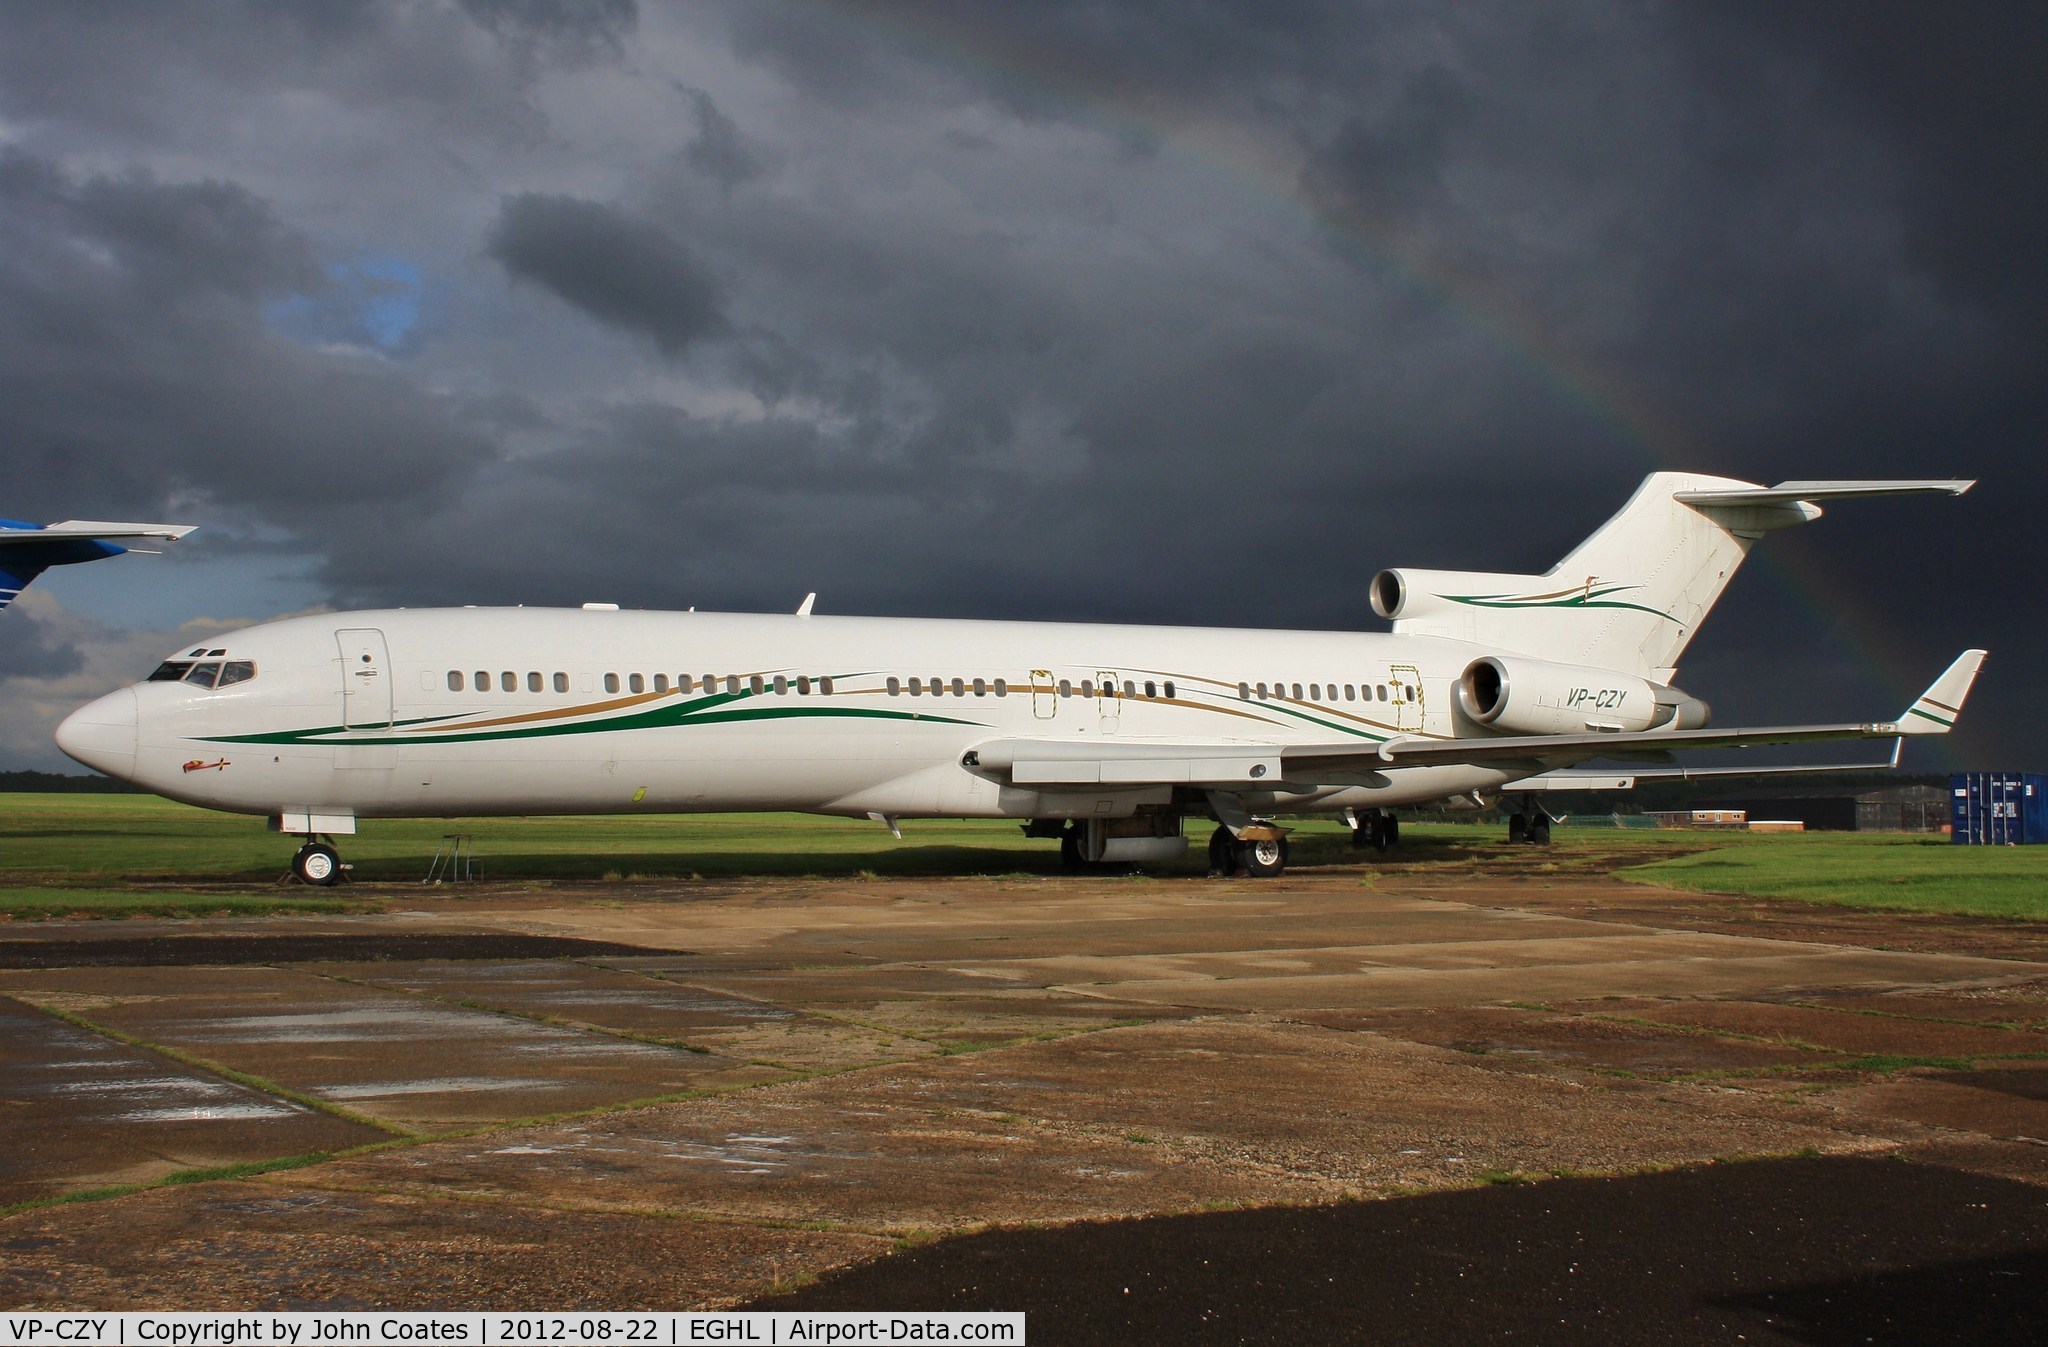 VP-CZY, 1978 Boeing 727-2P1 C/N 21595, After the storm at ATC